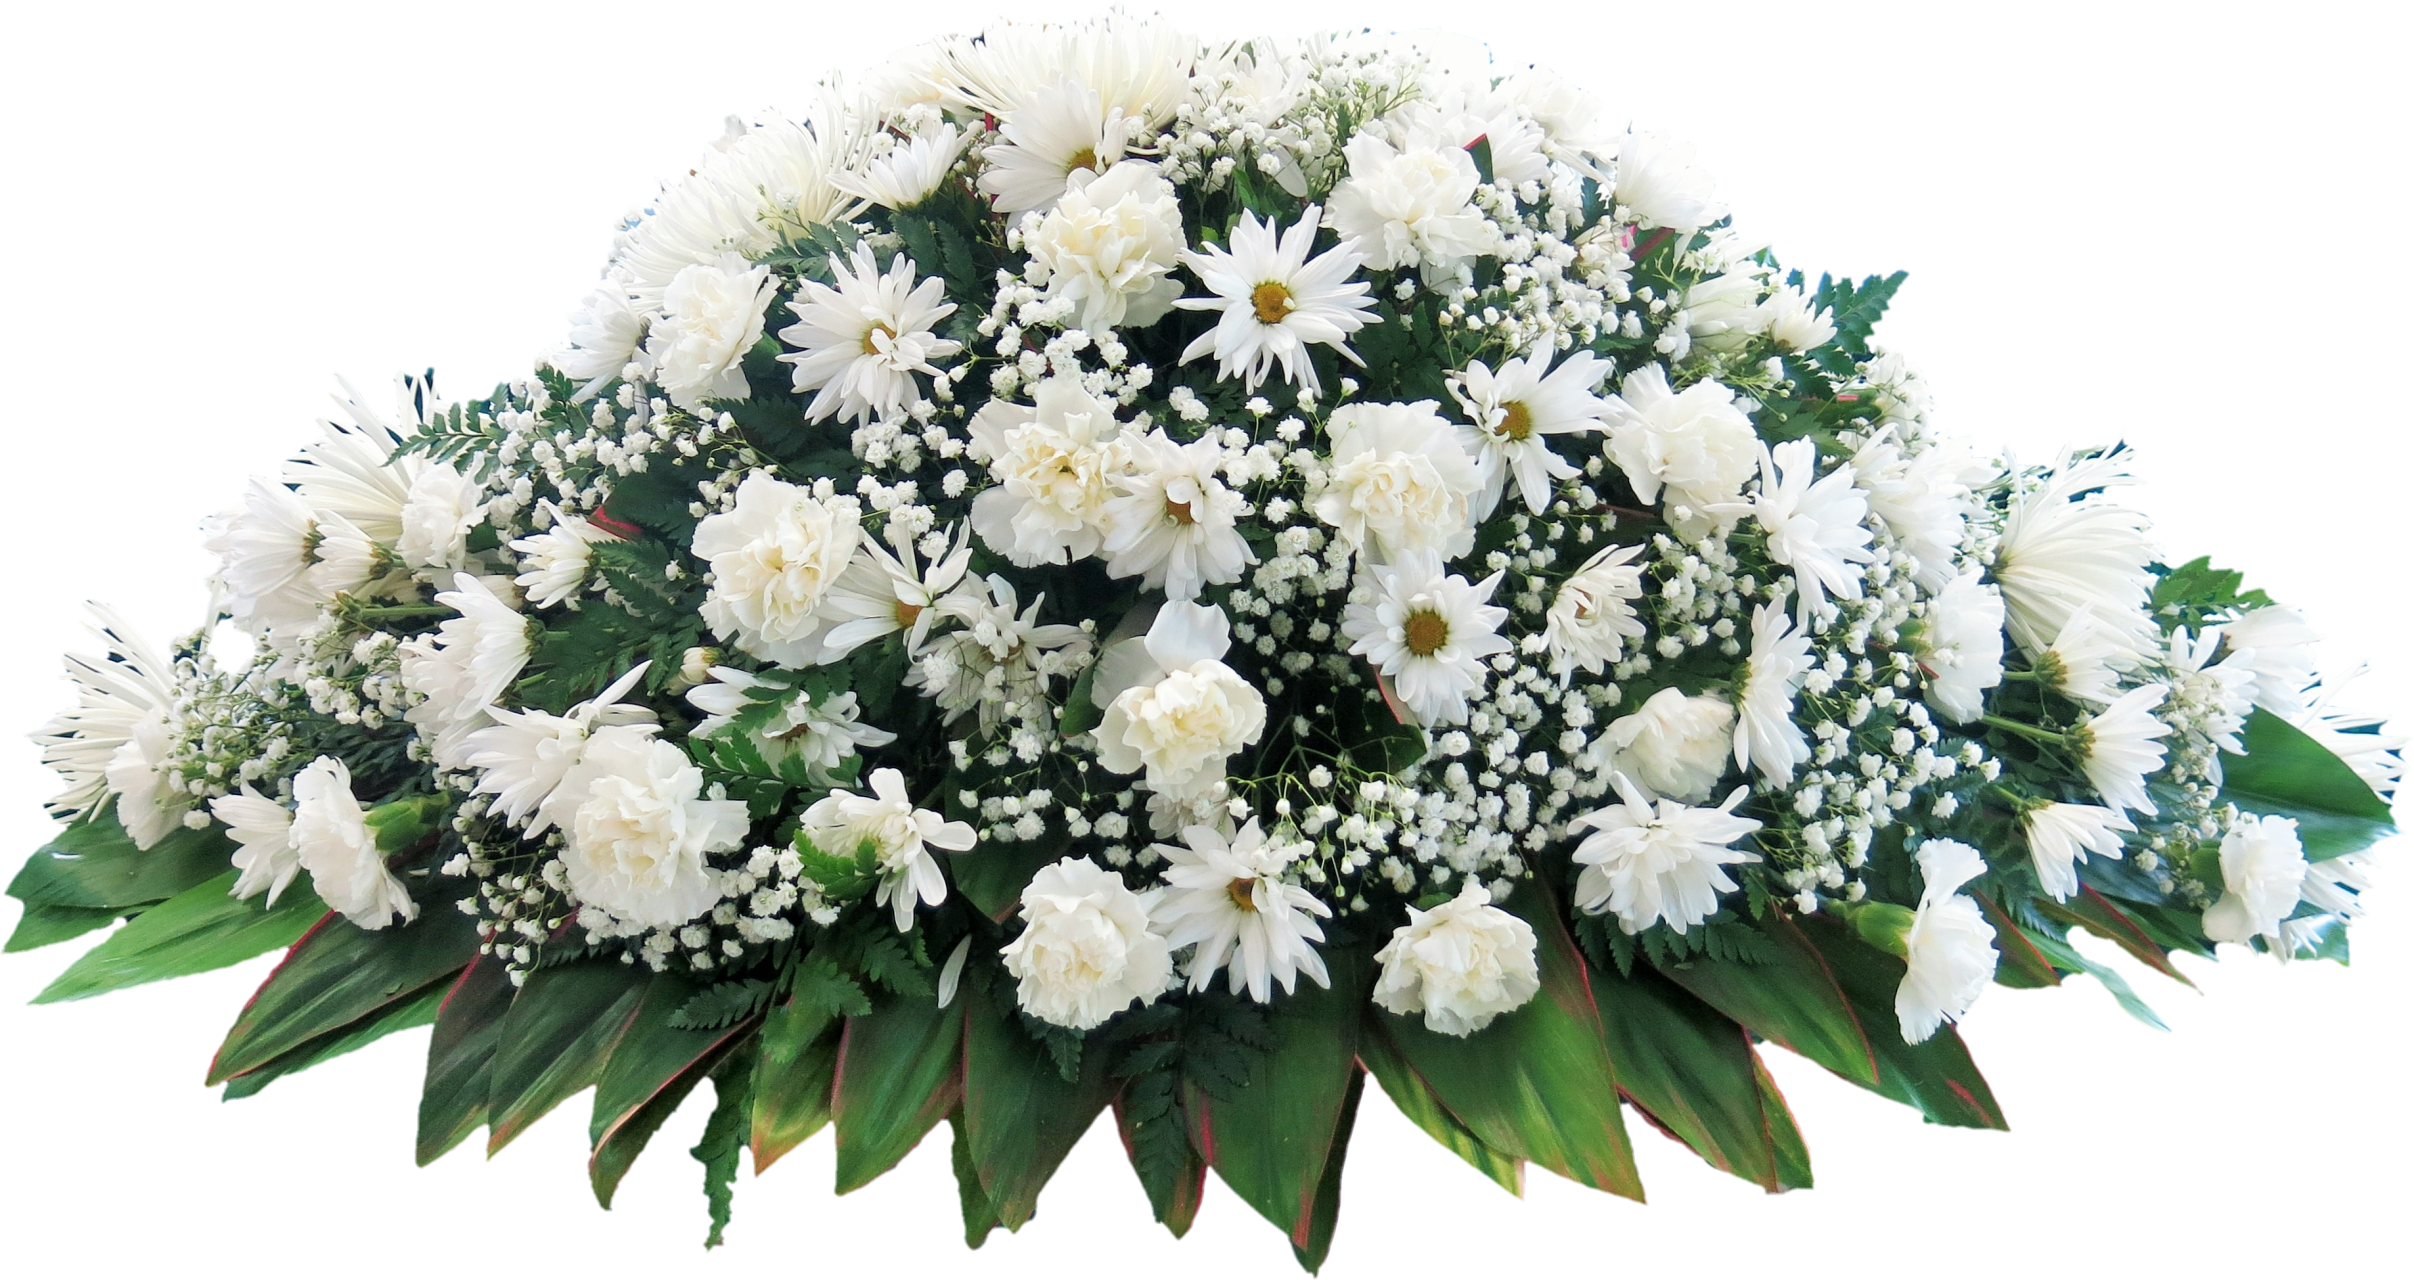 Download PNG image - Funeral Flowers Bunch Transparent Background 